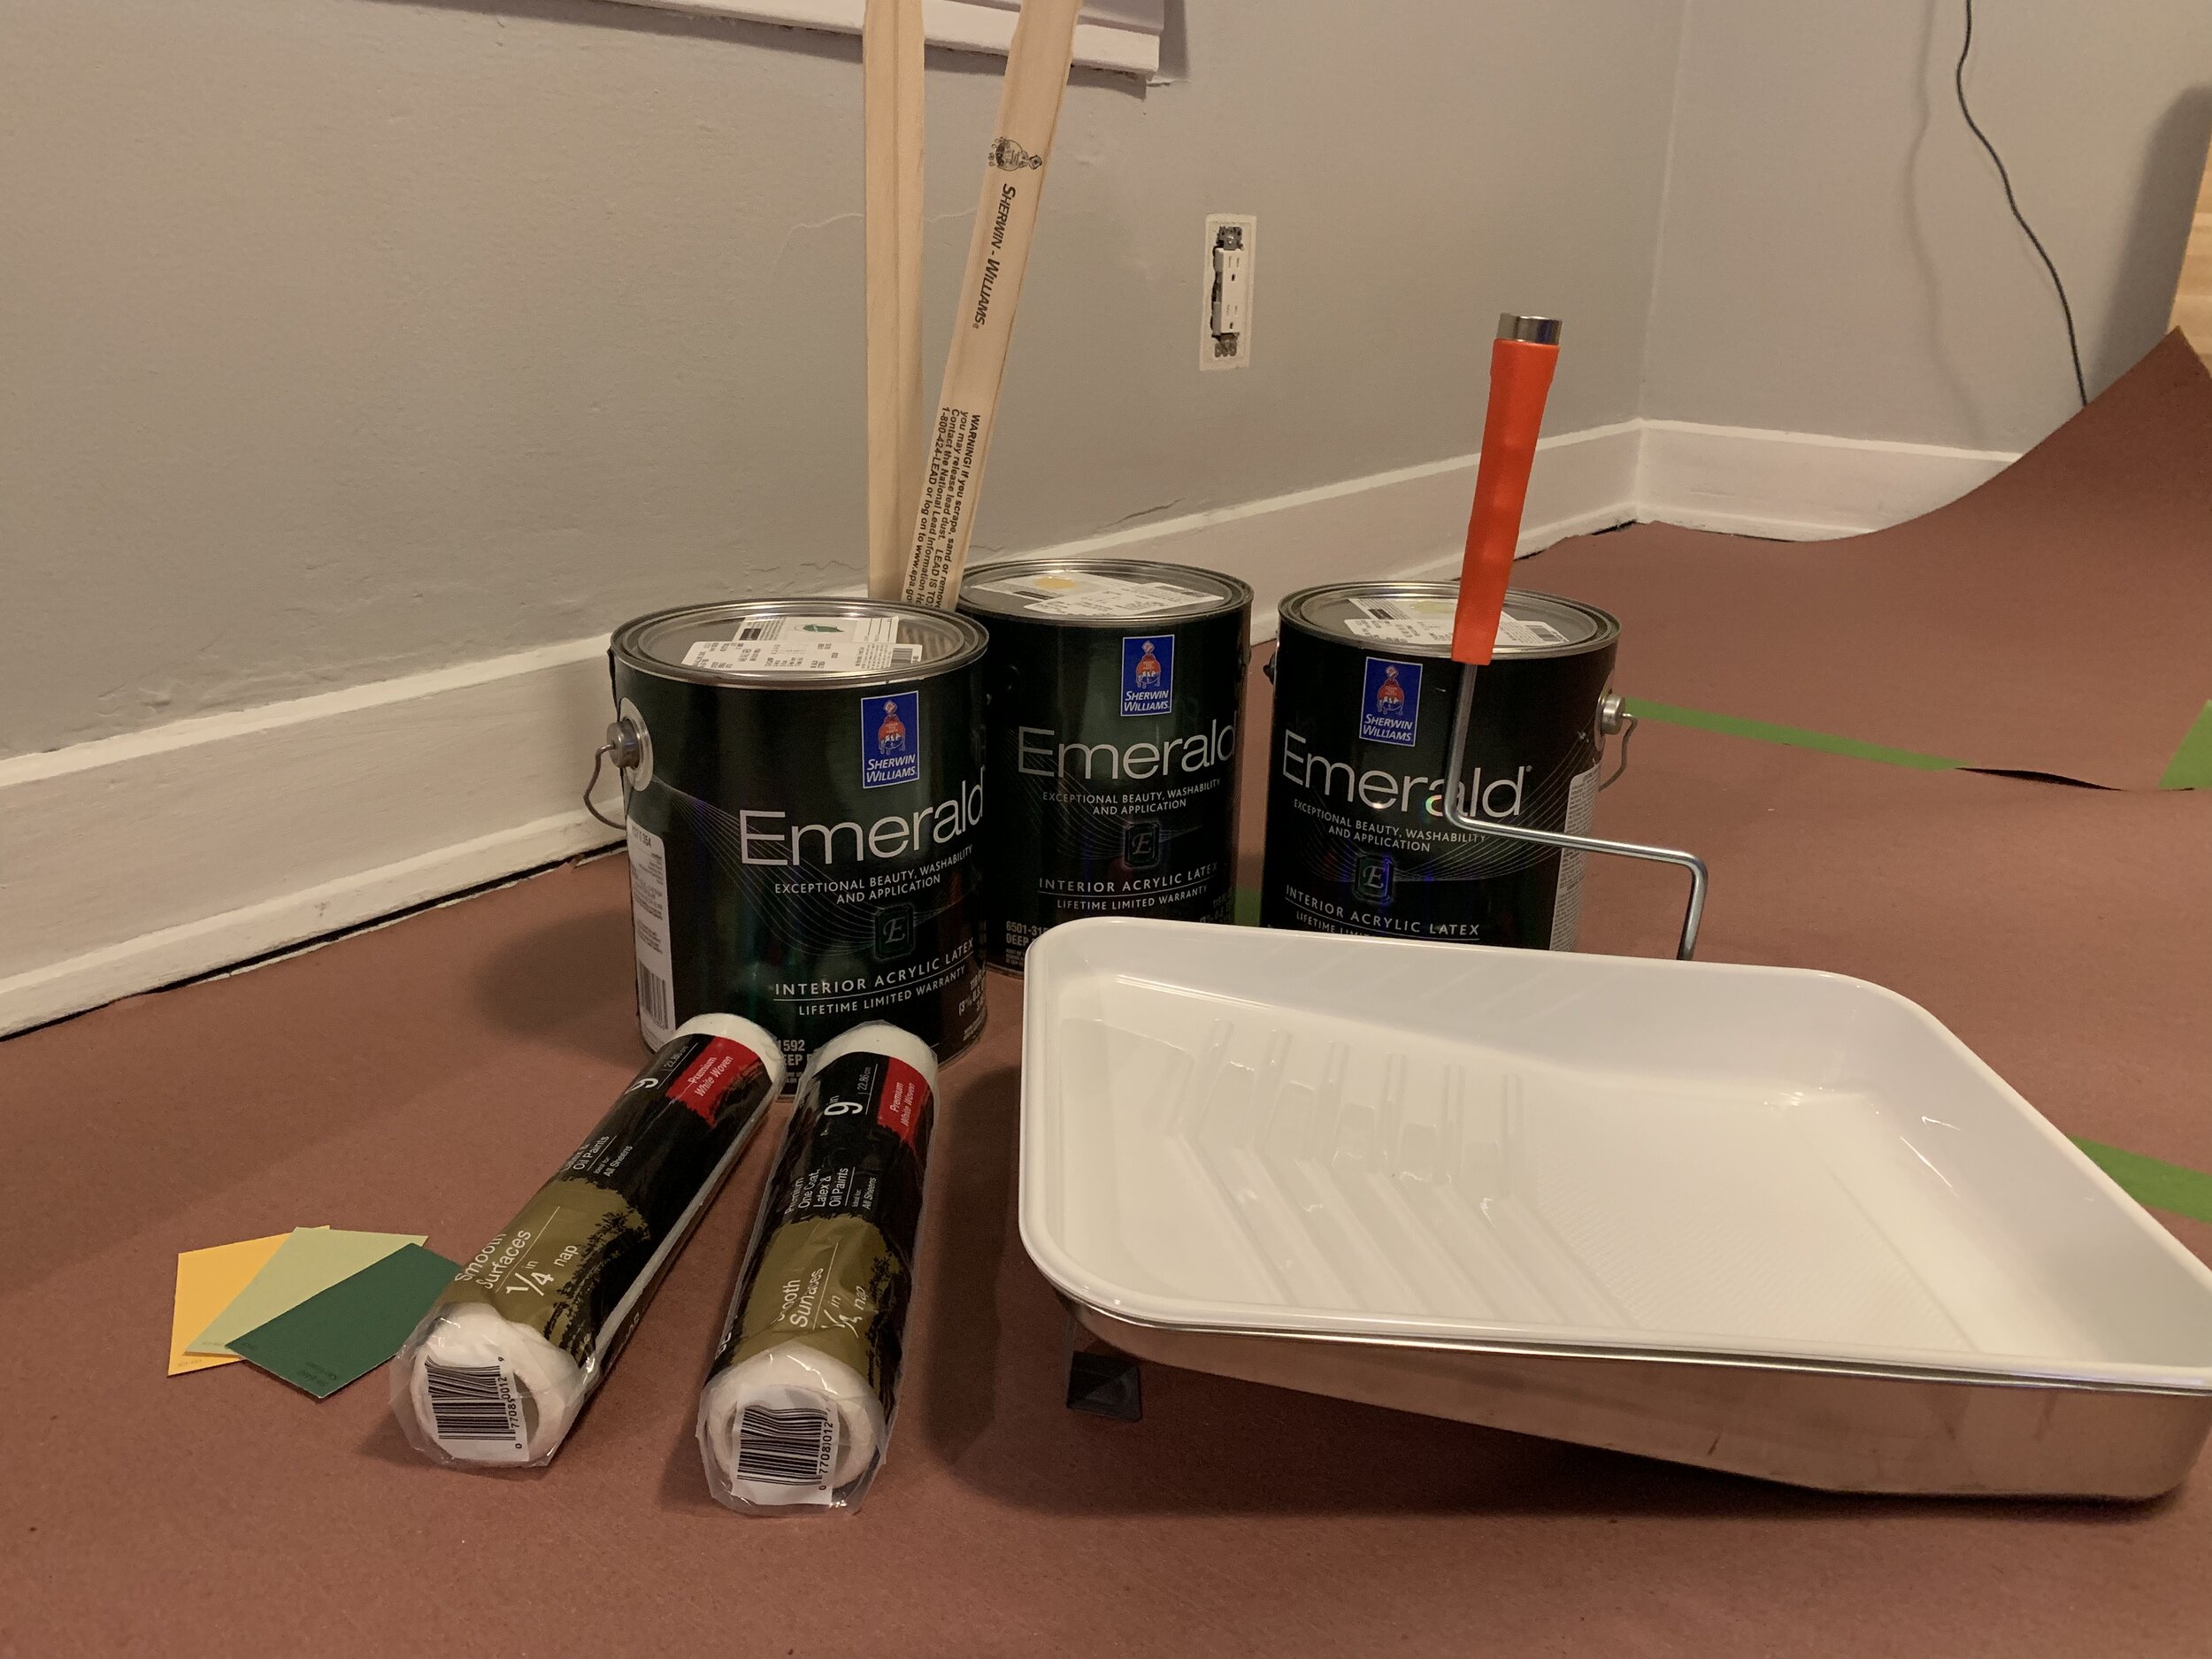 Getting ready to paint with Sherwin-Williams Emerald Interior paint.